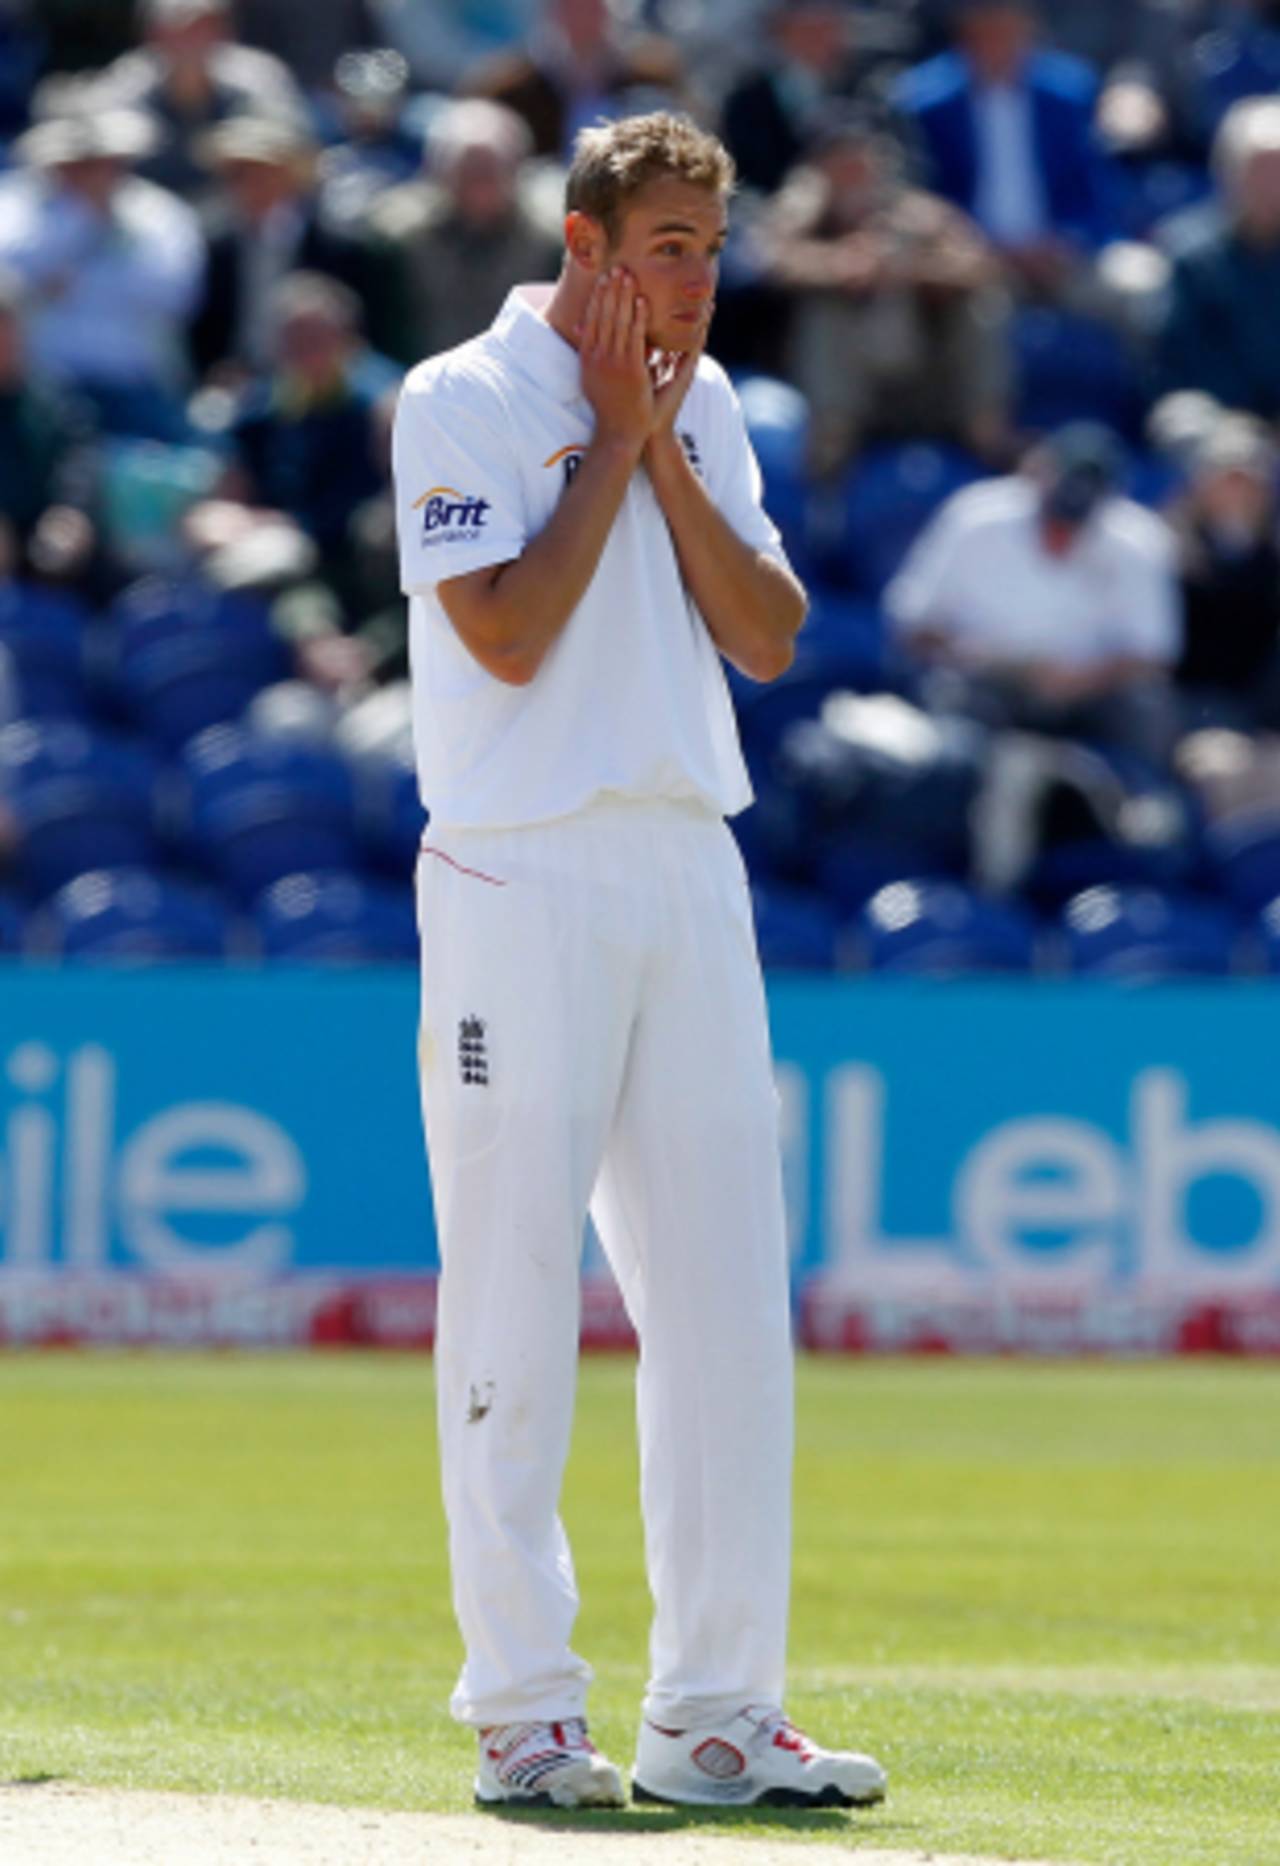 Stuart Broad can't believe his luck as another appeal is turned down, England v Sri Lanka, 1st Test, Cardiff, 2nd day, May 27 2011